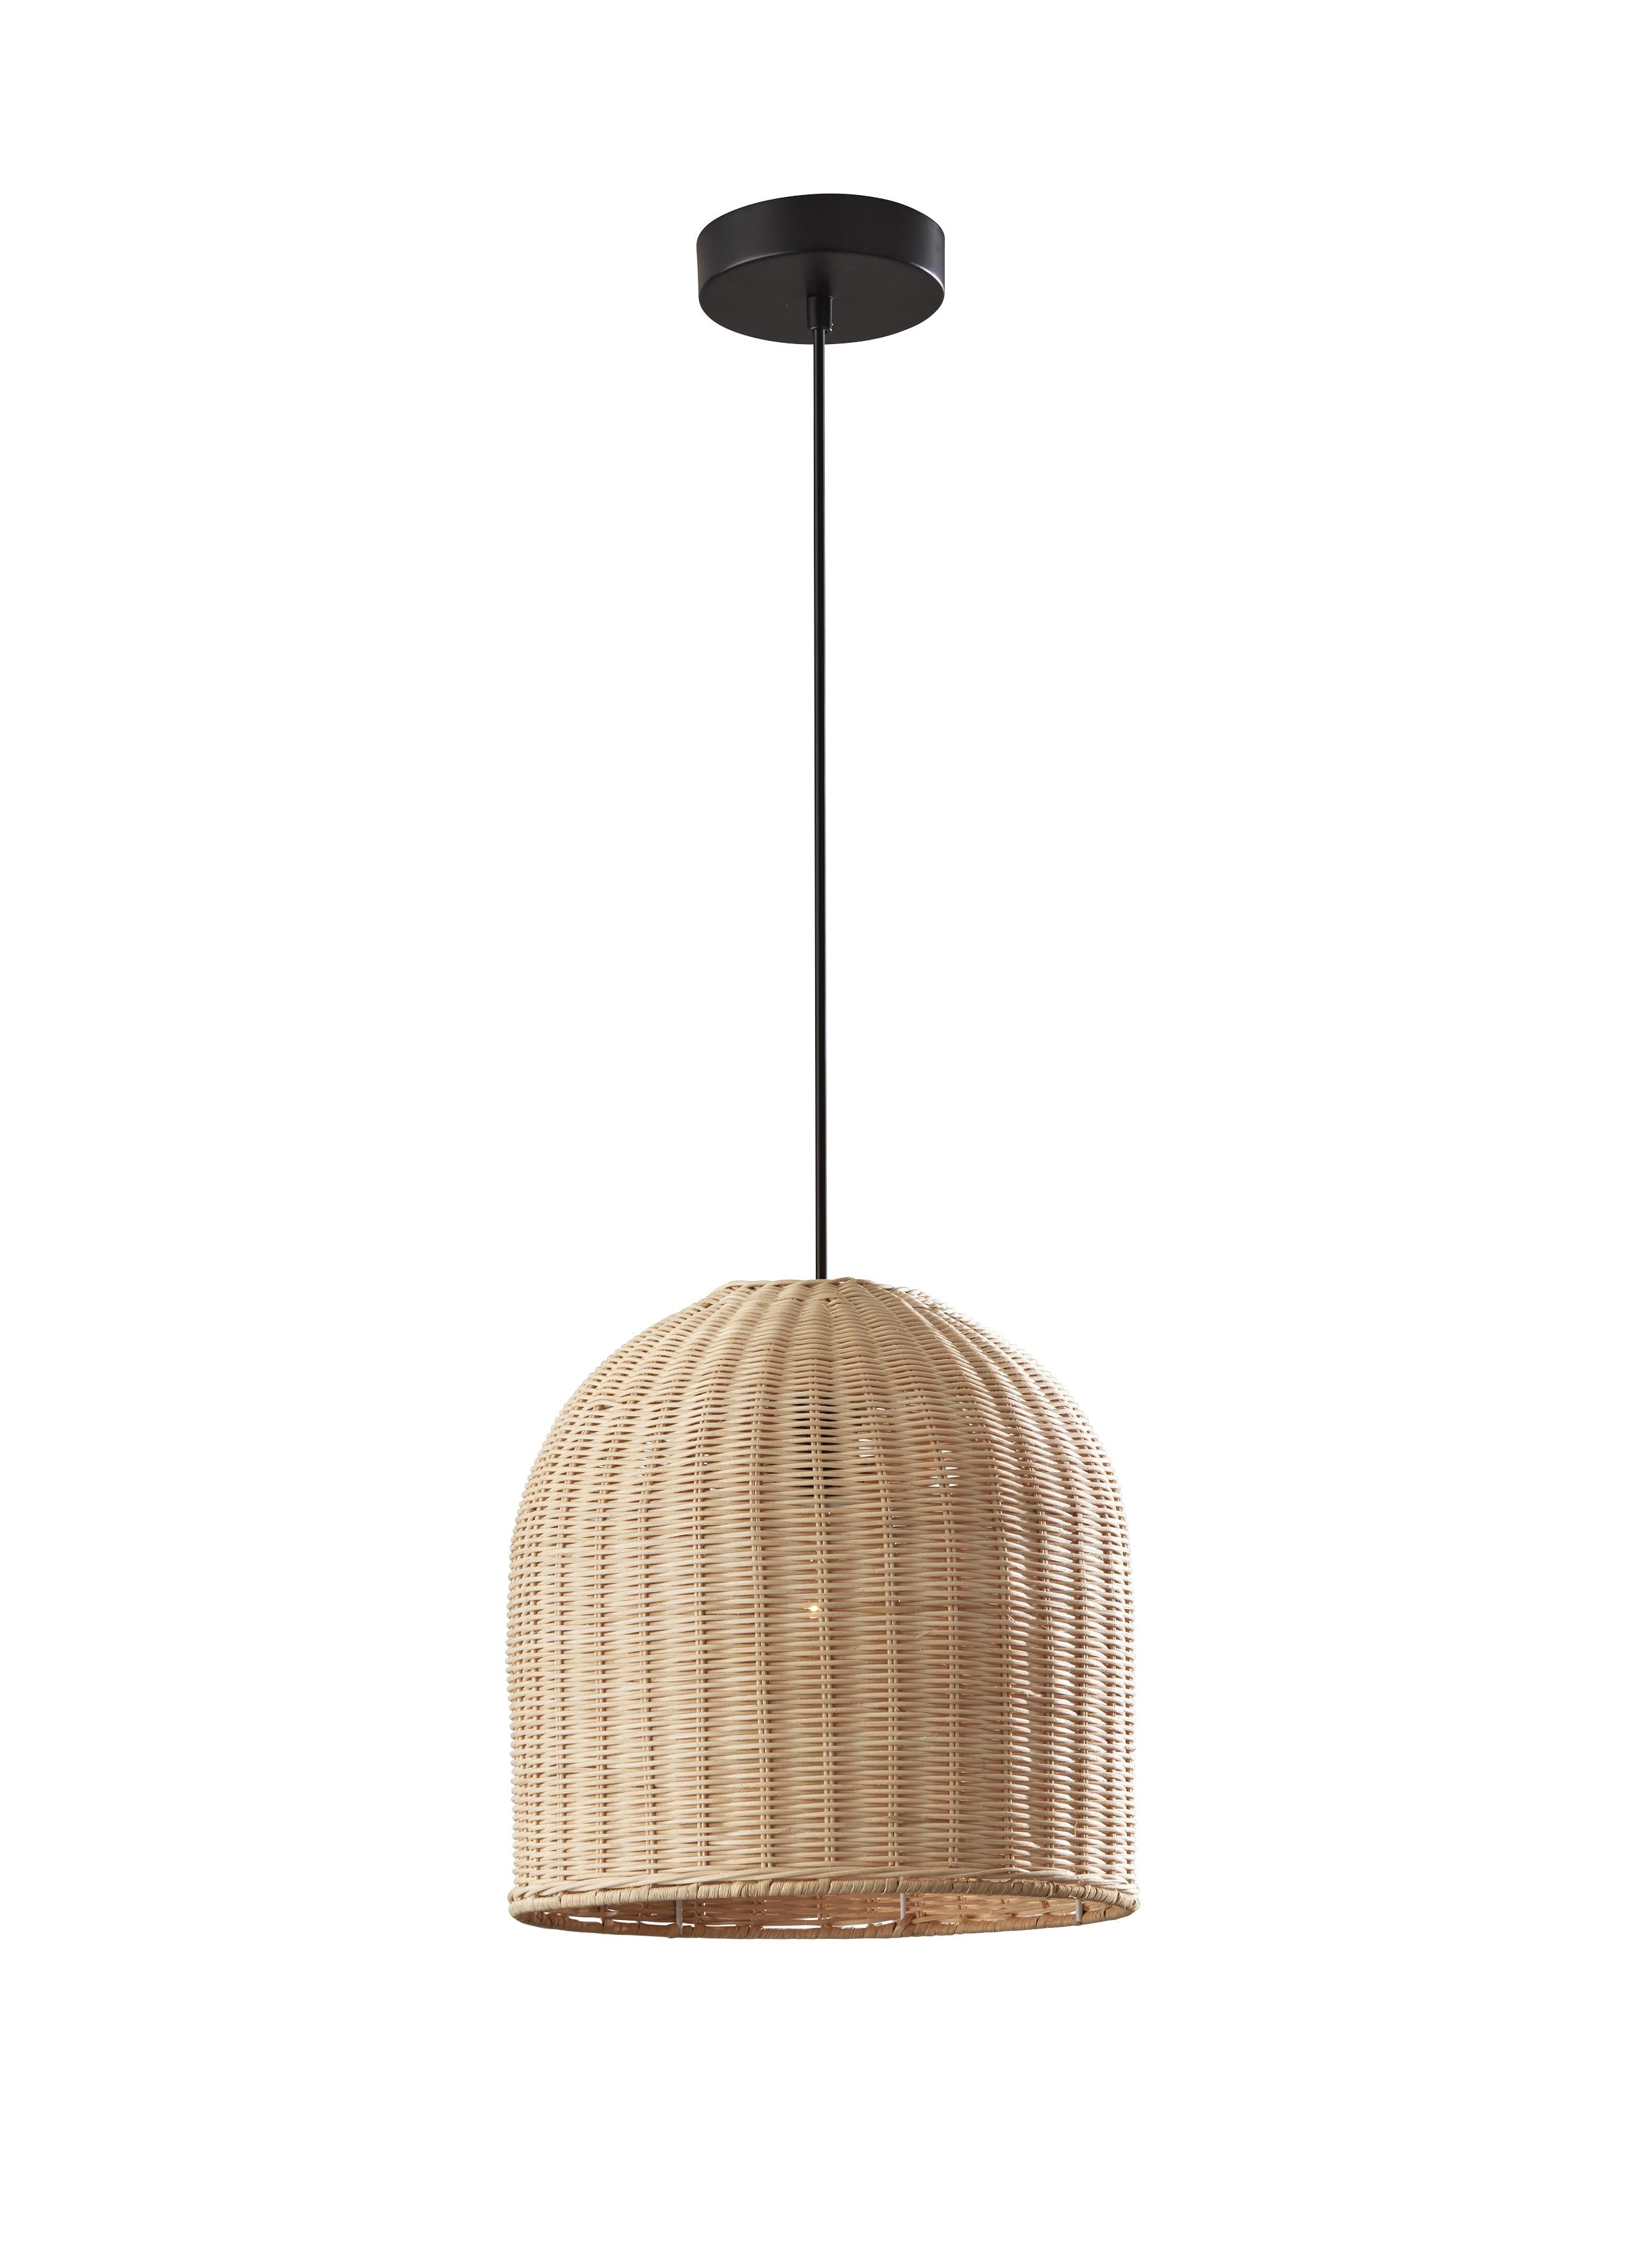 Bronze & Rattan Inverted Basket Pendant Lamp with Fabric Cord